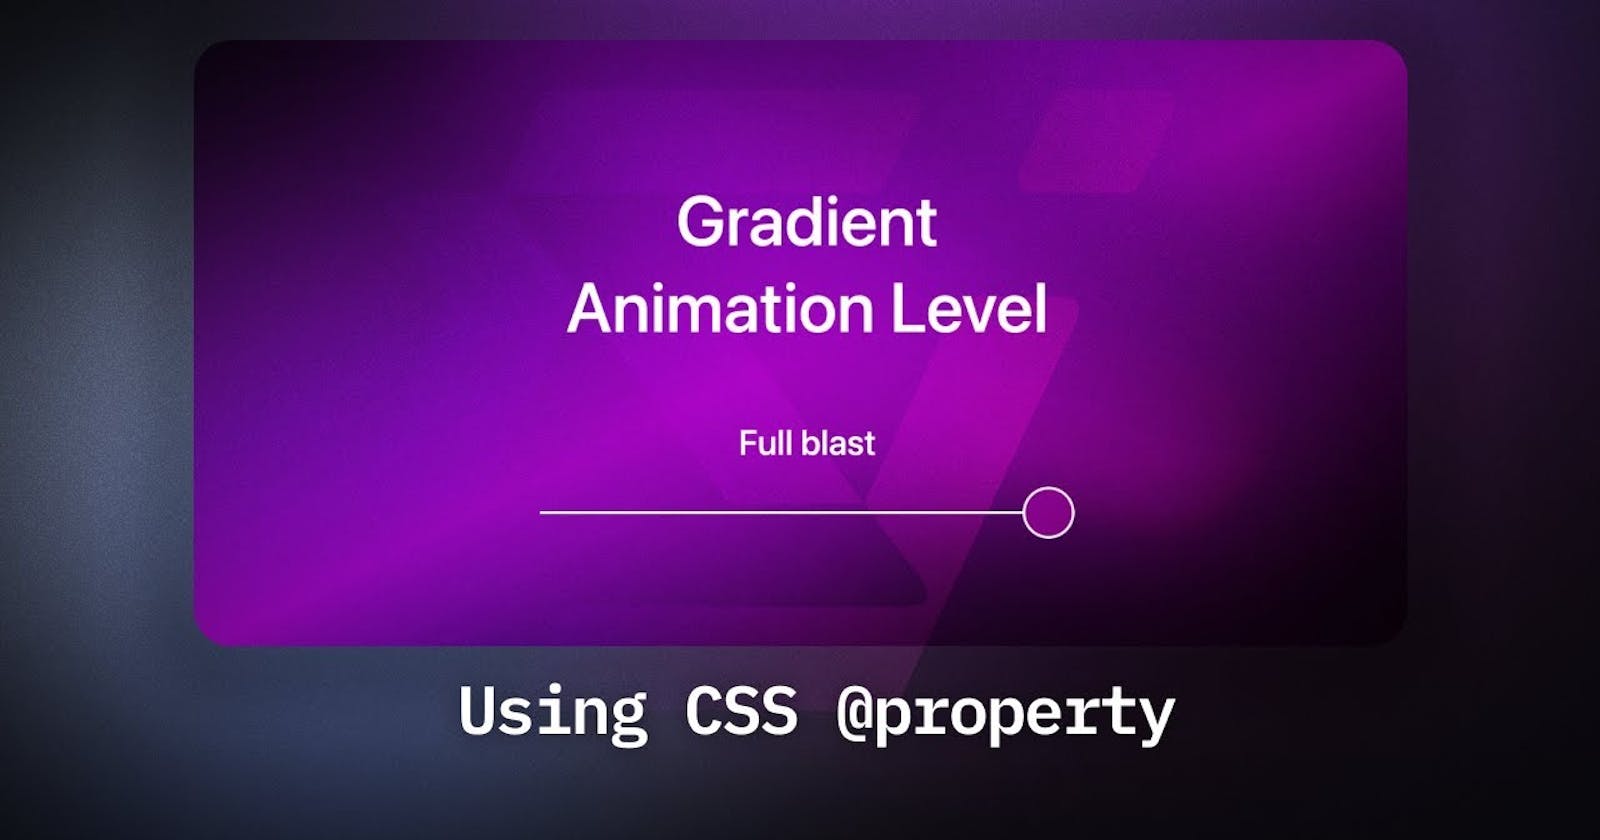 We can FINALLY animate gradients with CSS!